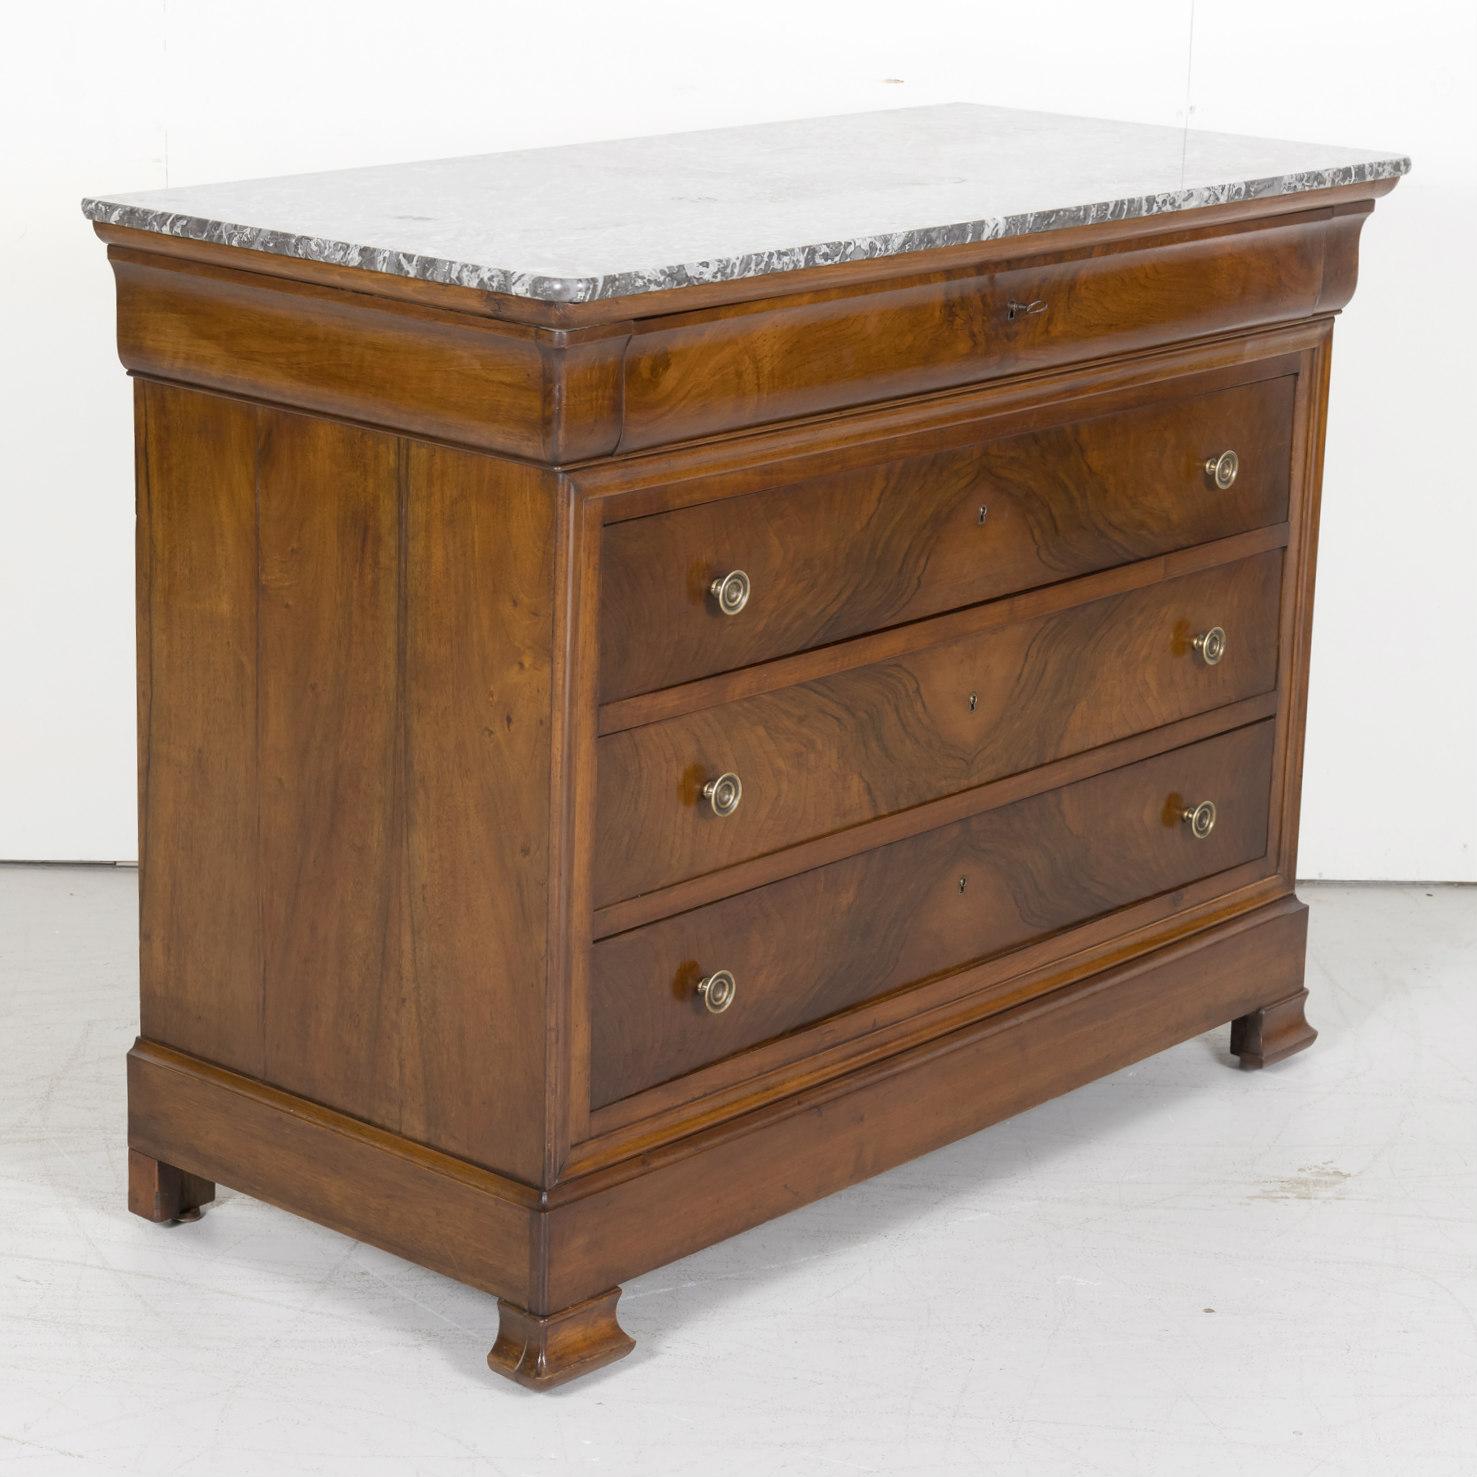 Mid-19th Century 19th Century French Louis Philippe Period Walnut Commode with Bookmatched Front